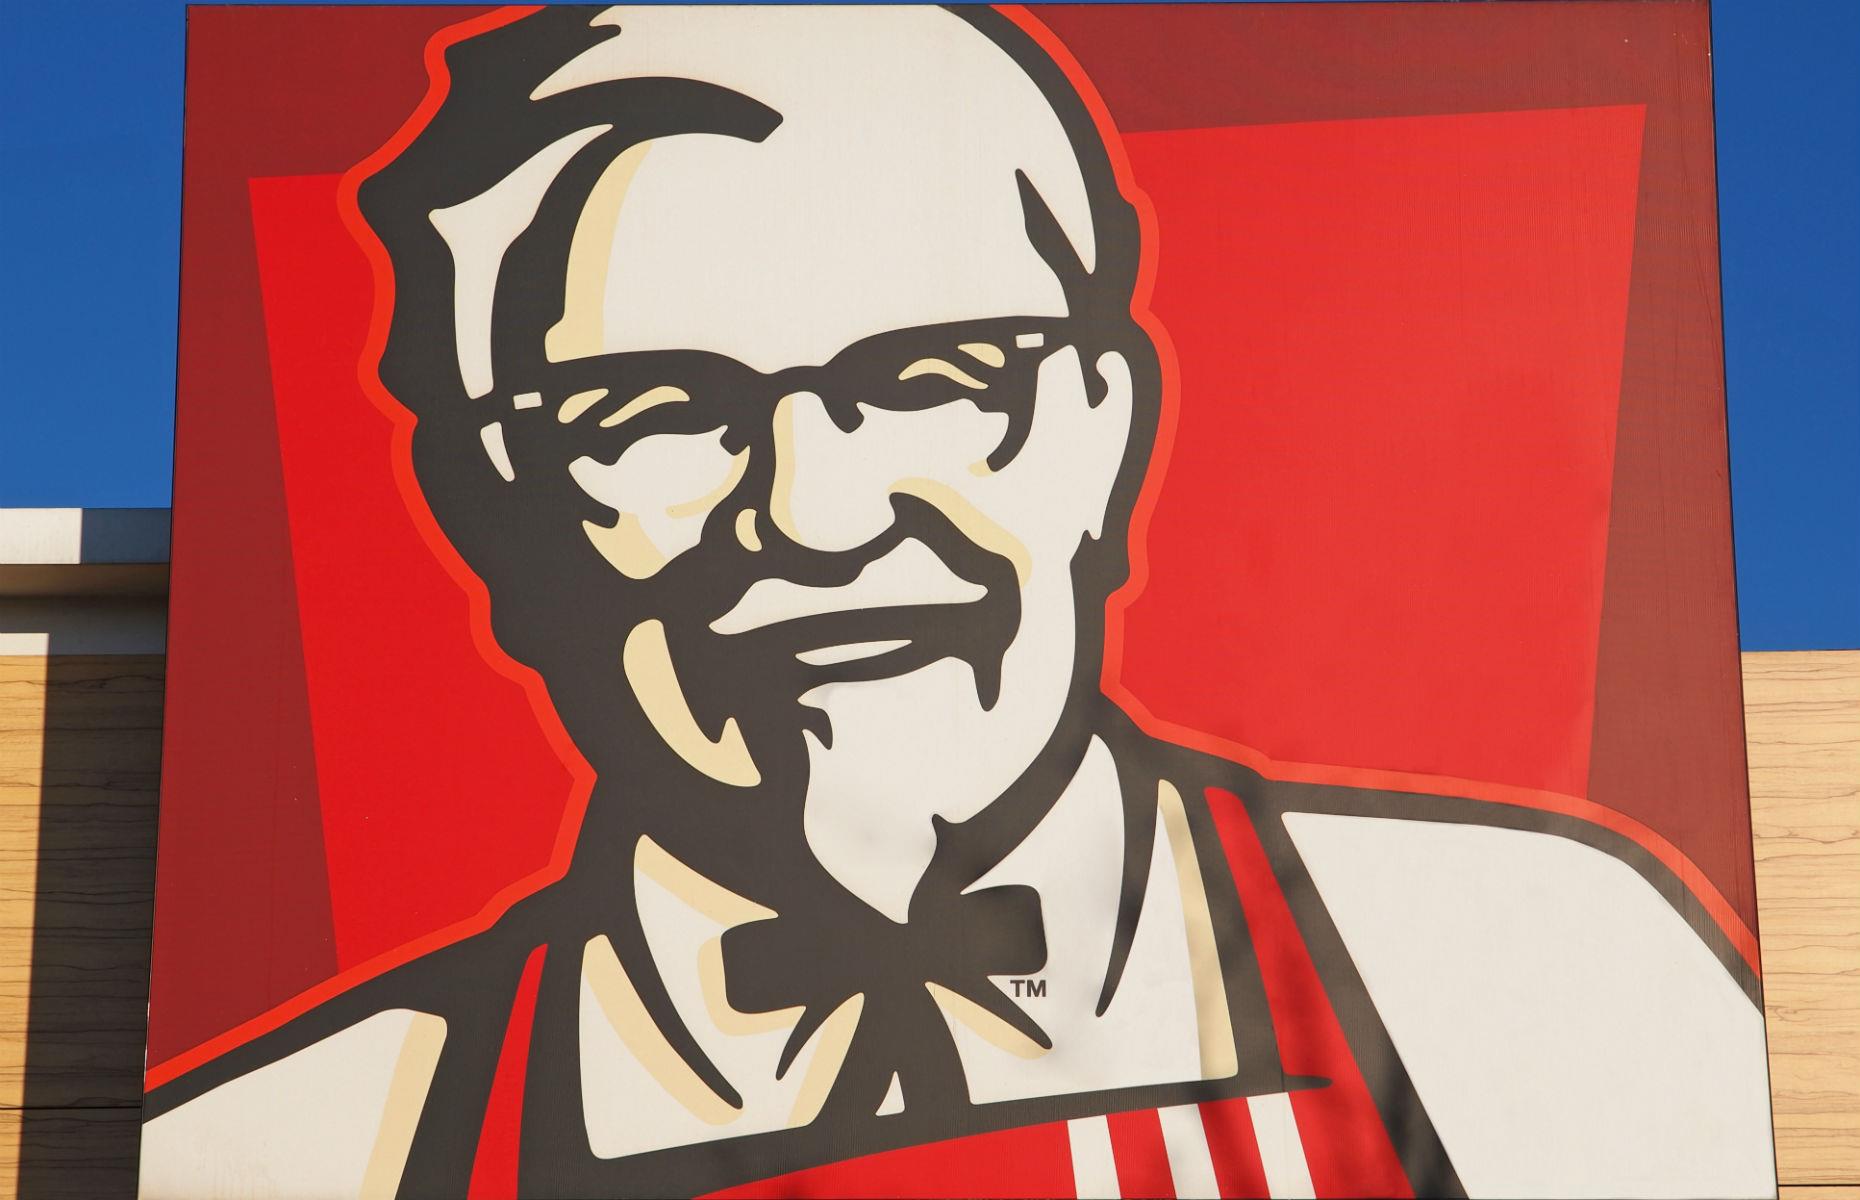 Colonel Sanders – Net worth: $3.5 million (£2.96m) (at time of death)